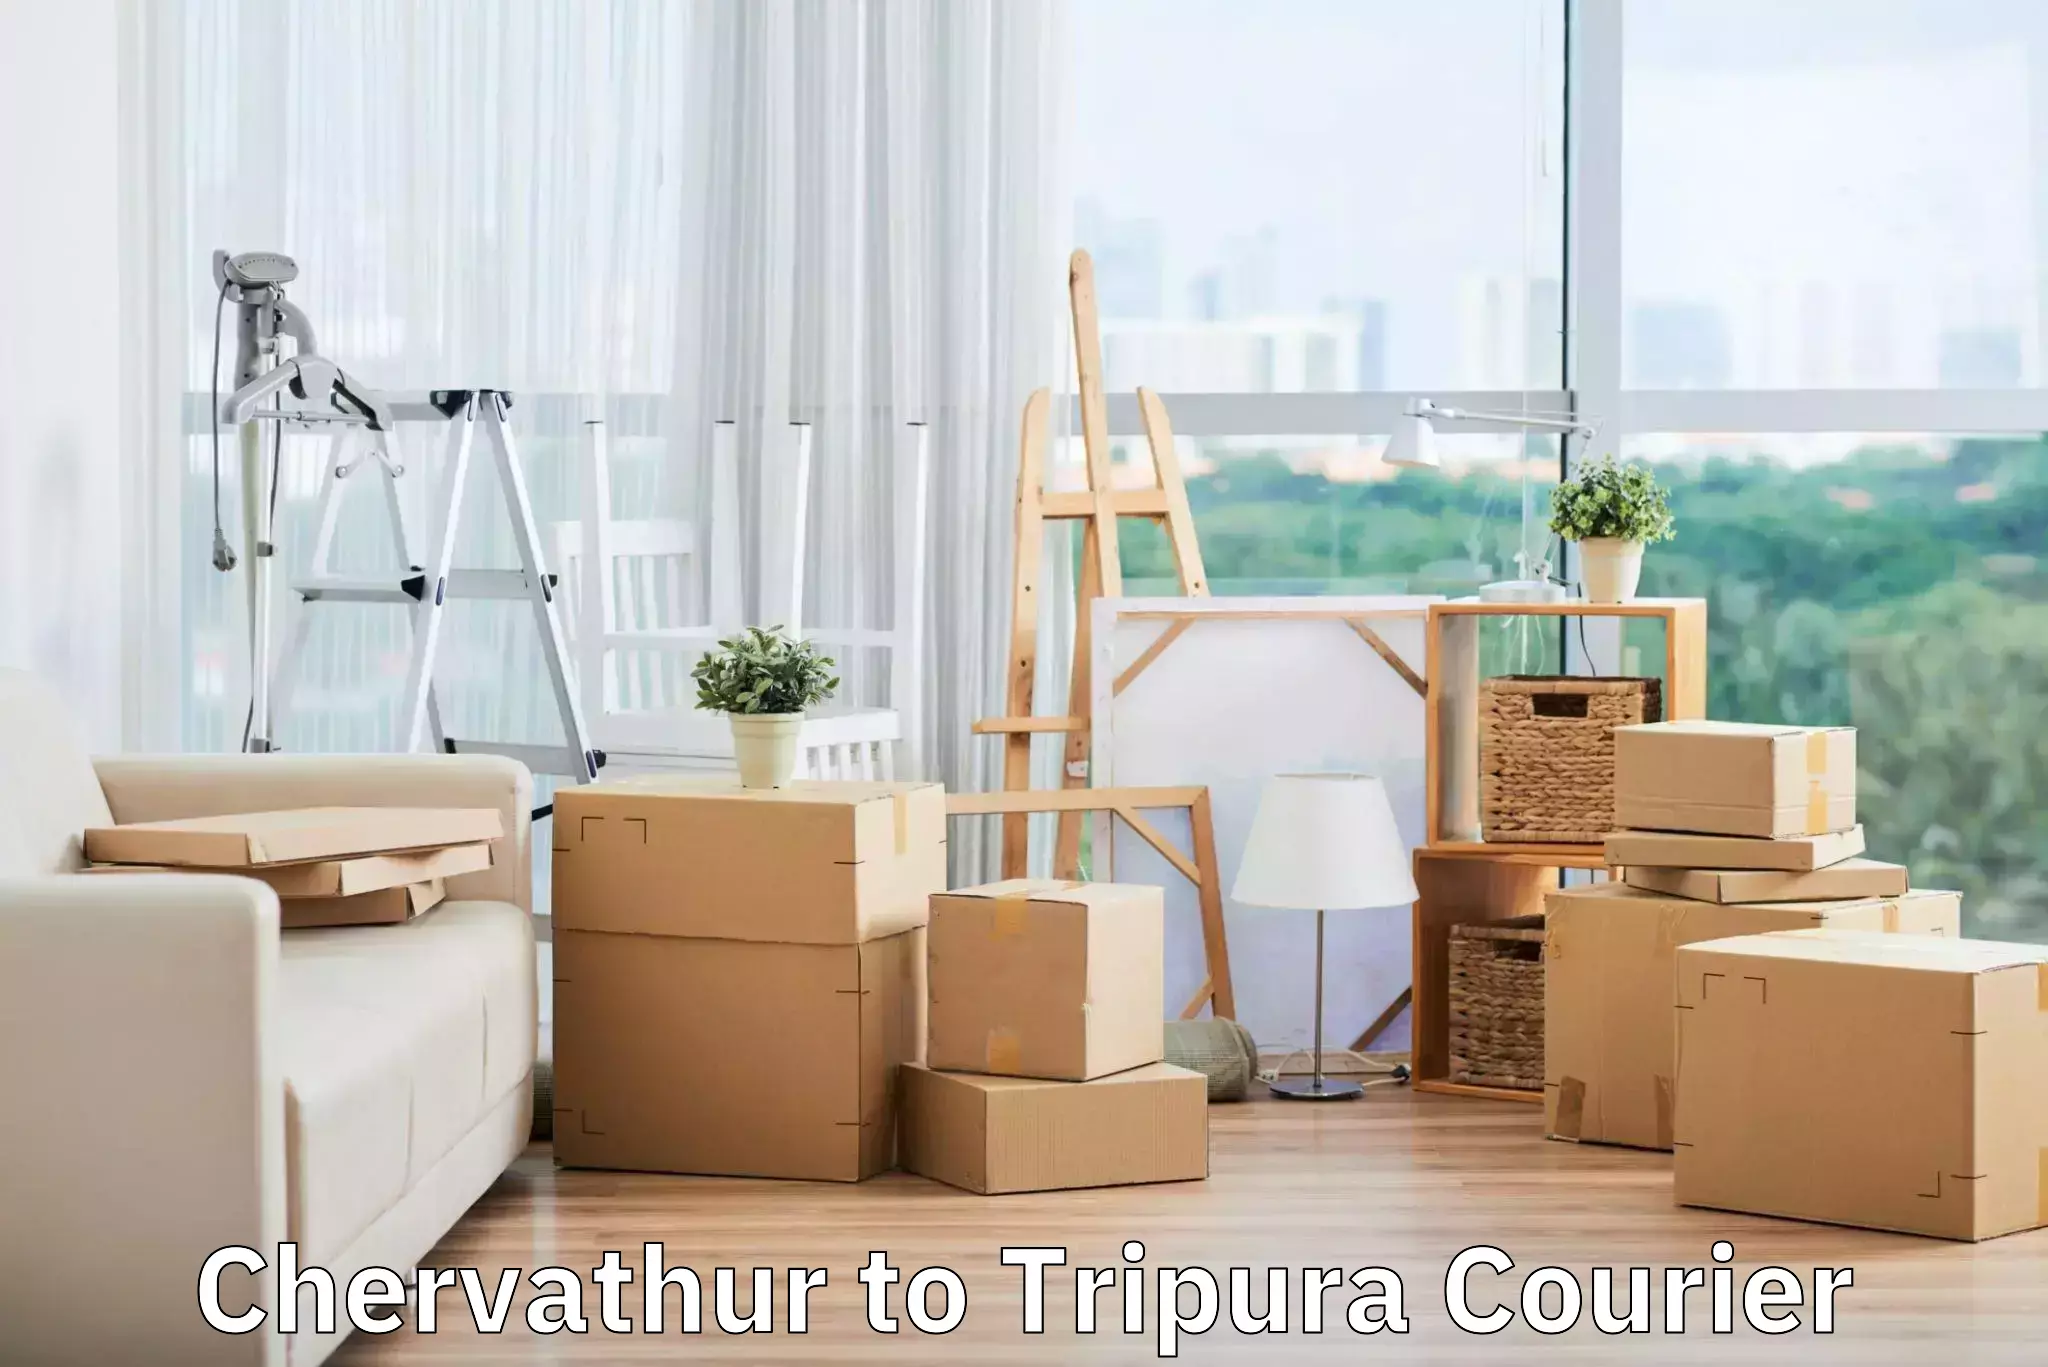 Personal luggage delivery in Chervathur to Udaipur Tripura